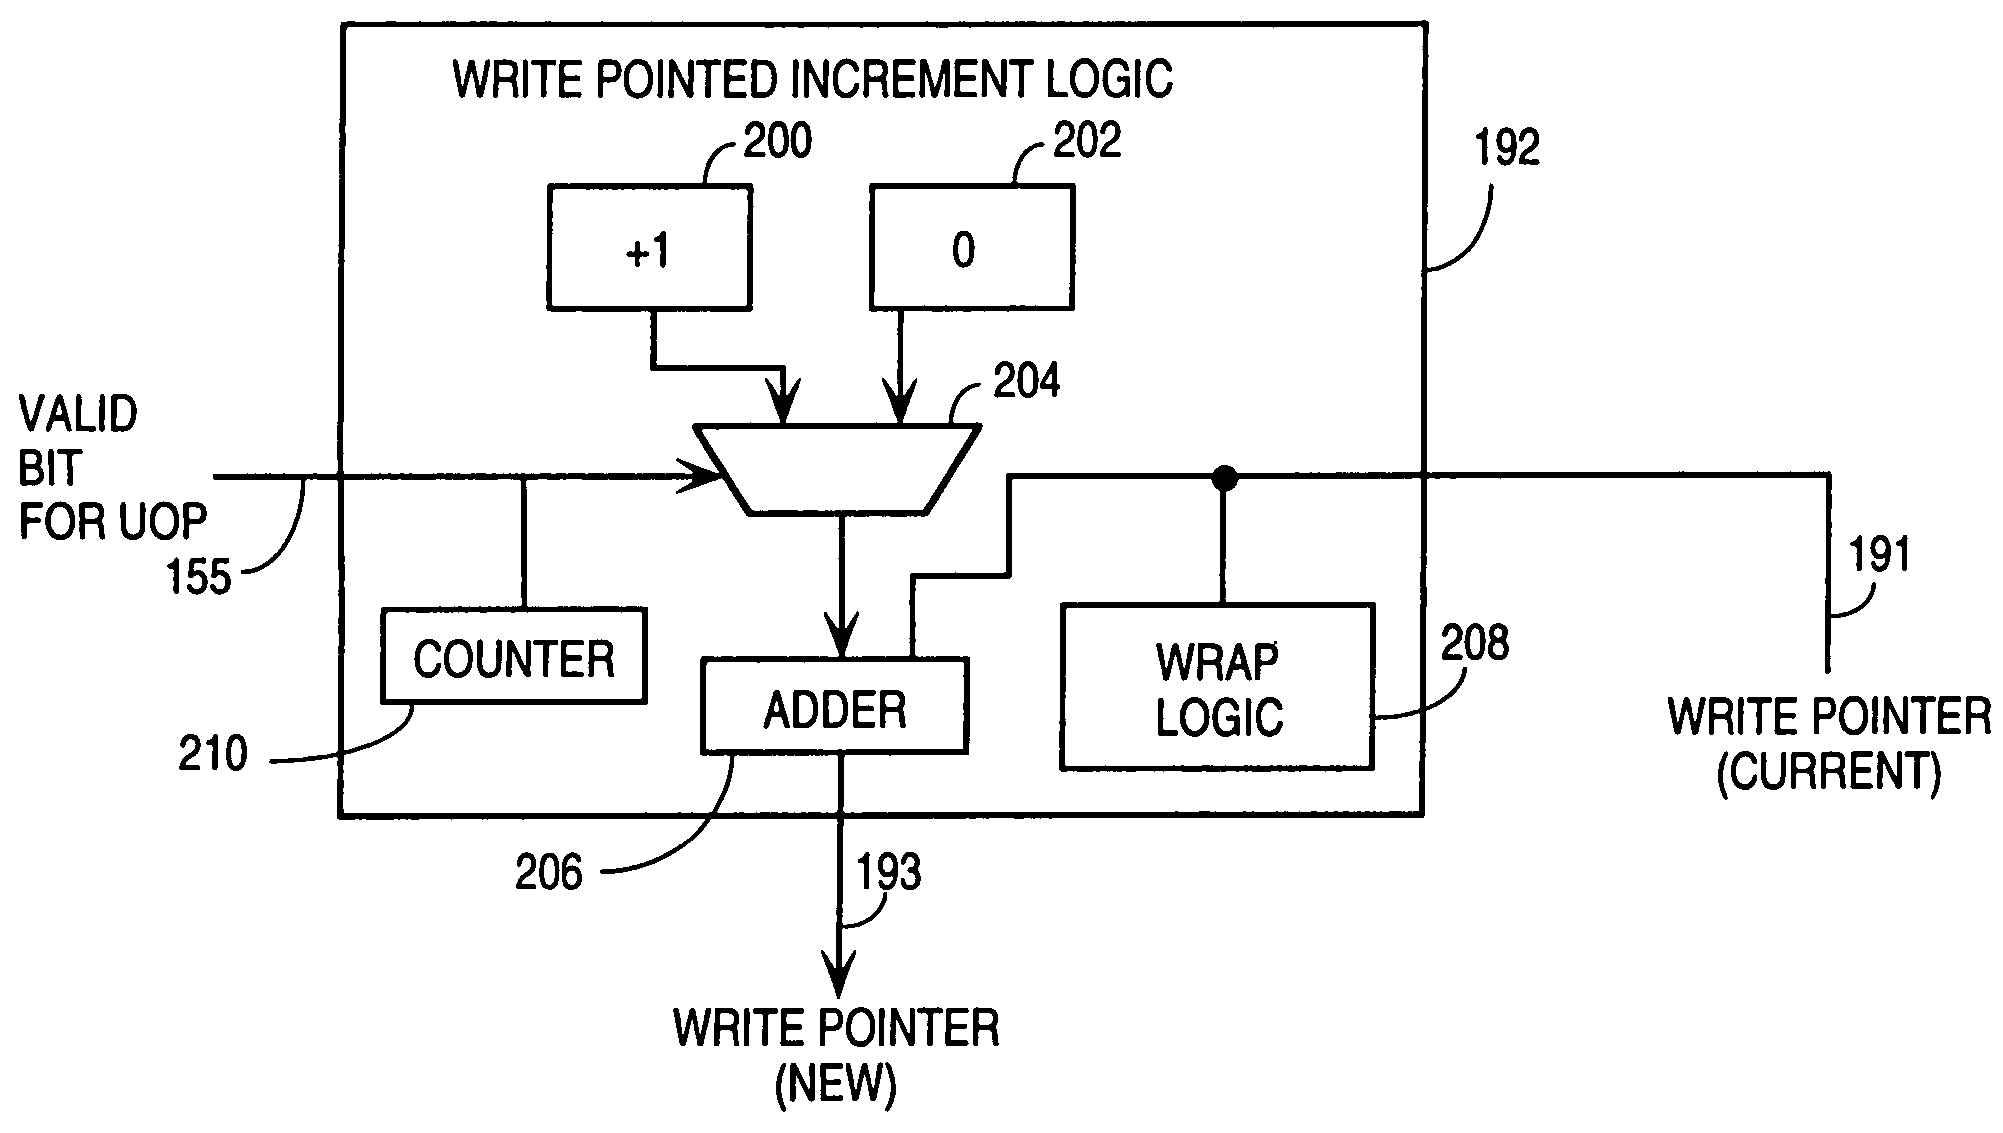 Method and apparatus selectively to advance a write pointer for a queue based on the indicated validity or invalidity of an instruction stored within the queue